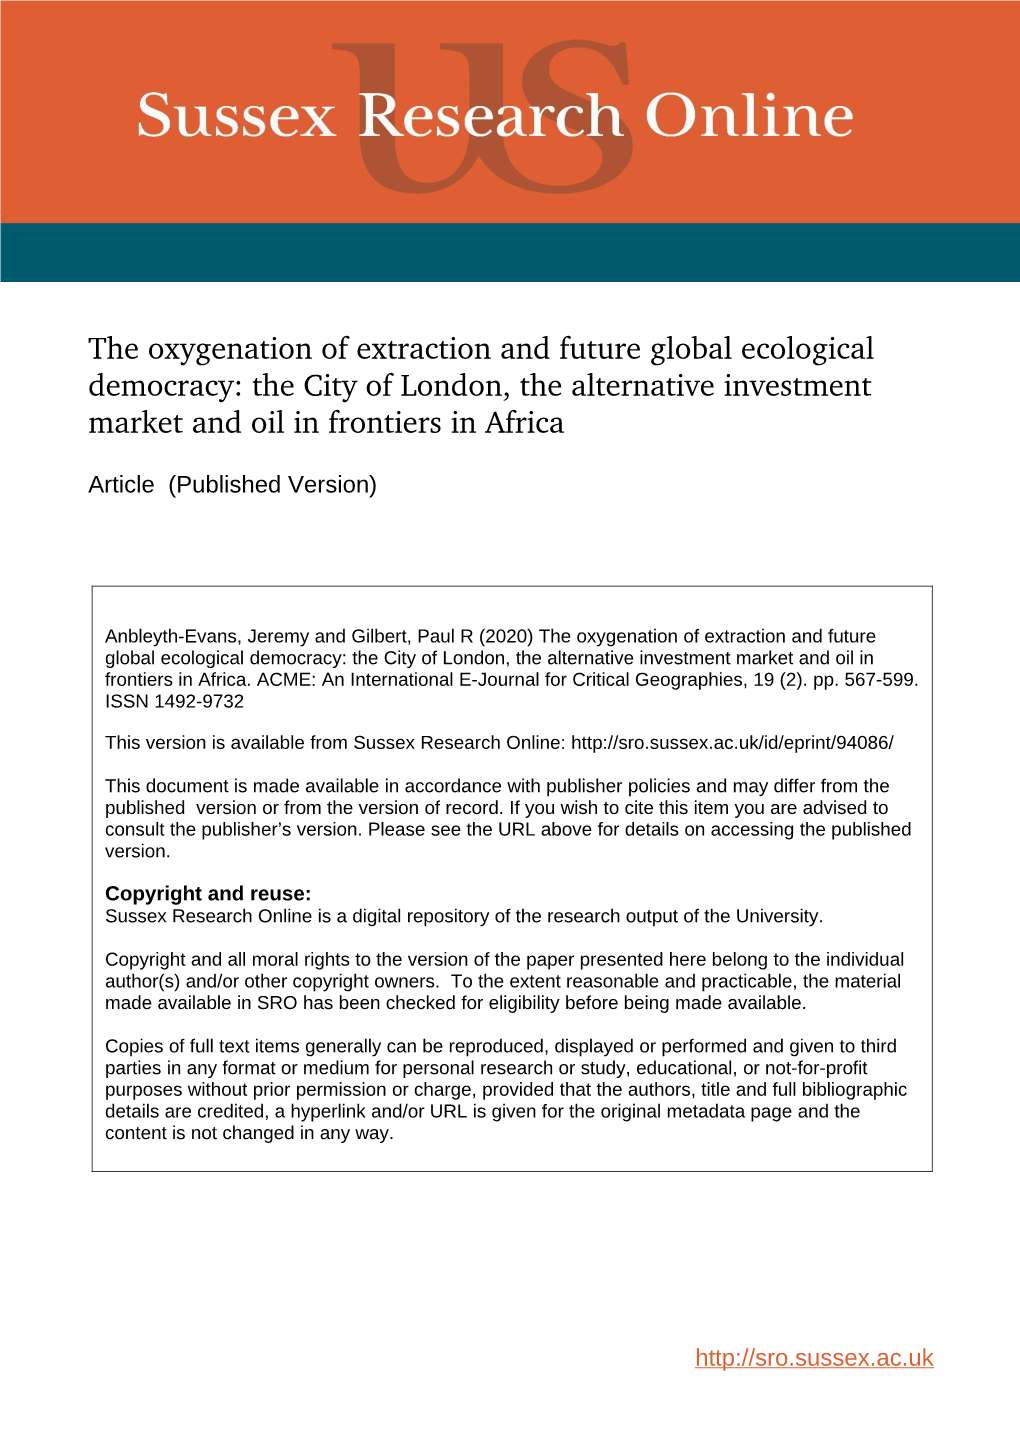 The Oxygenation of Extraction and Future Global Ecological Democracy: the City of London, the Alternative Investment Market and Oil in Frontiers in Africa